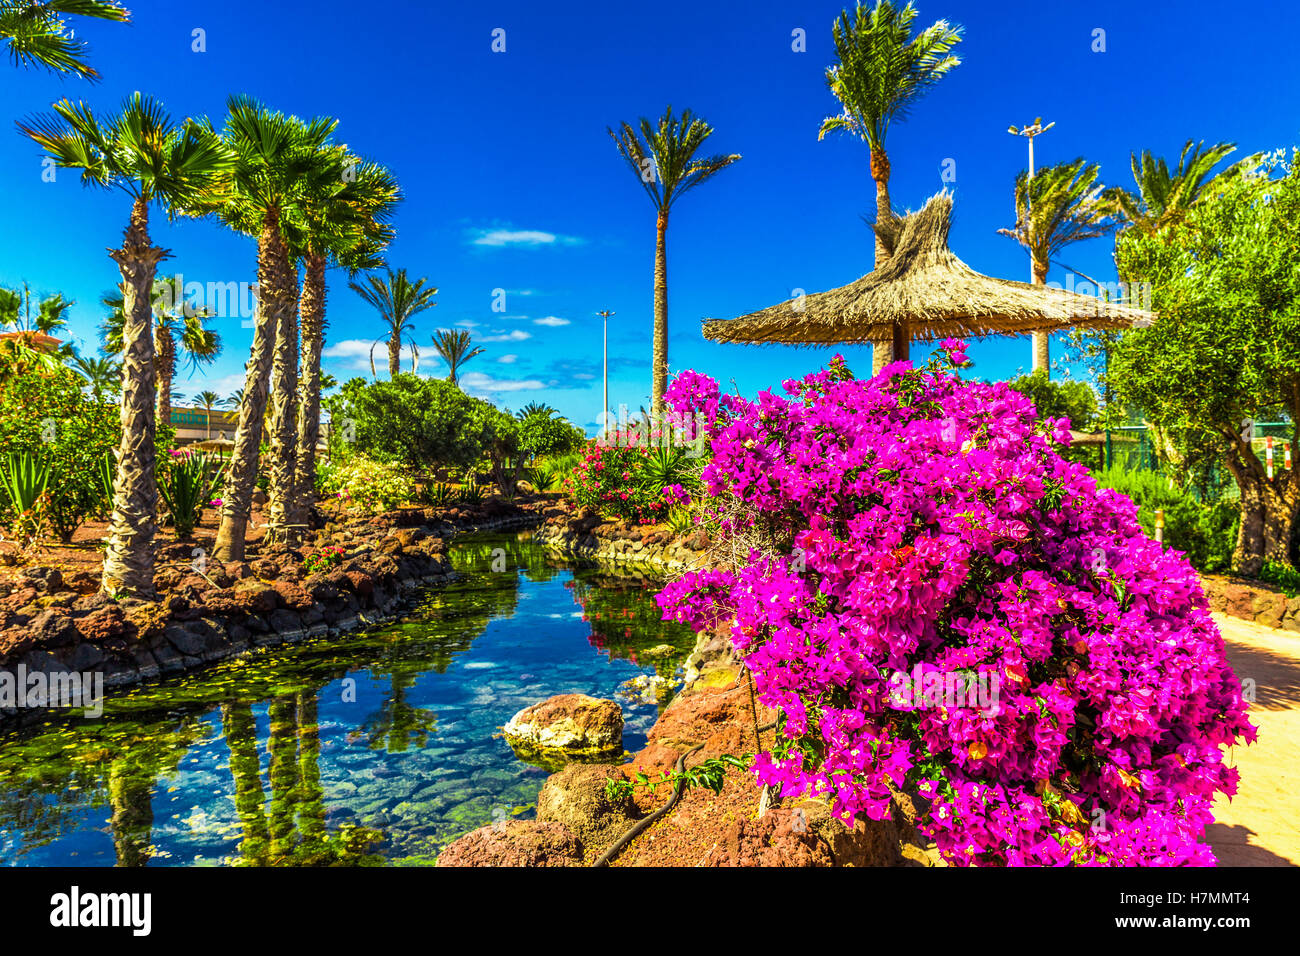 Beautiful view to tropical island resort garden with palm trees, flowers and river on Fuerteventura, Canary Islands, Spain Stock Photo